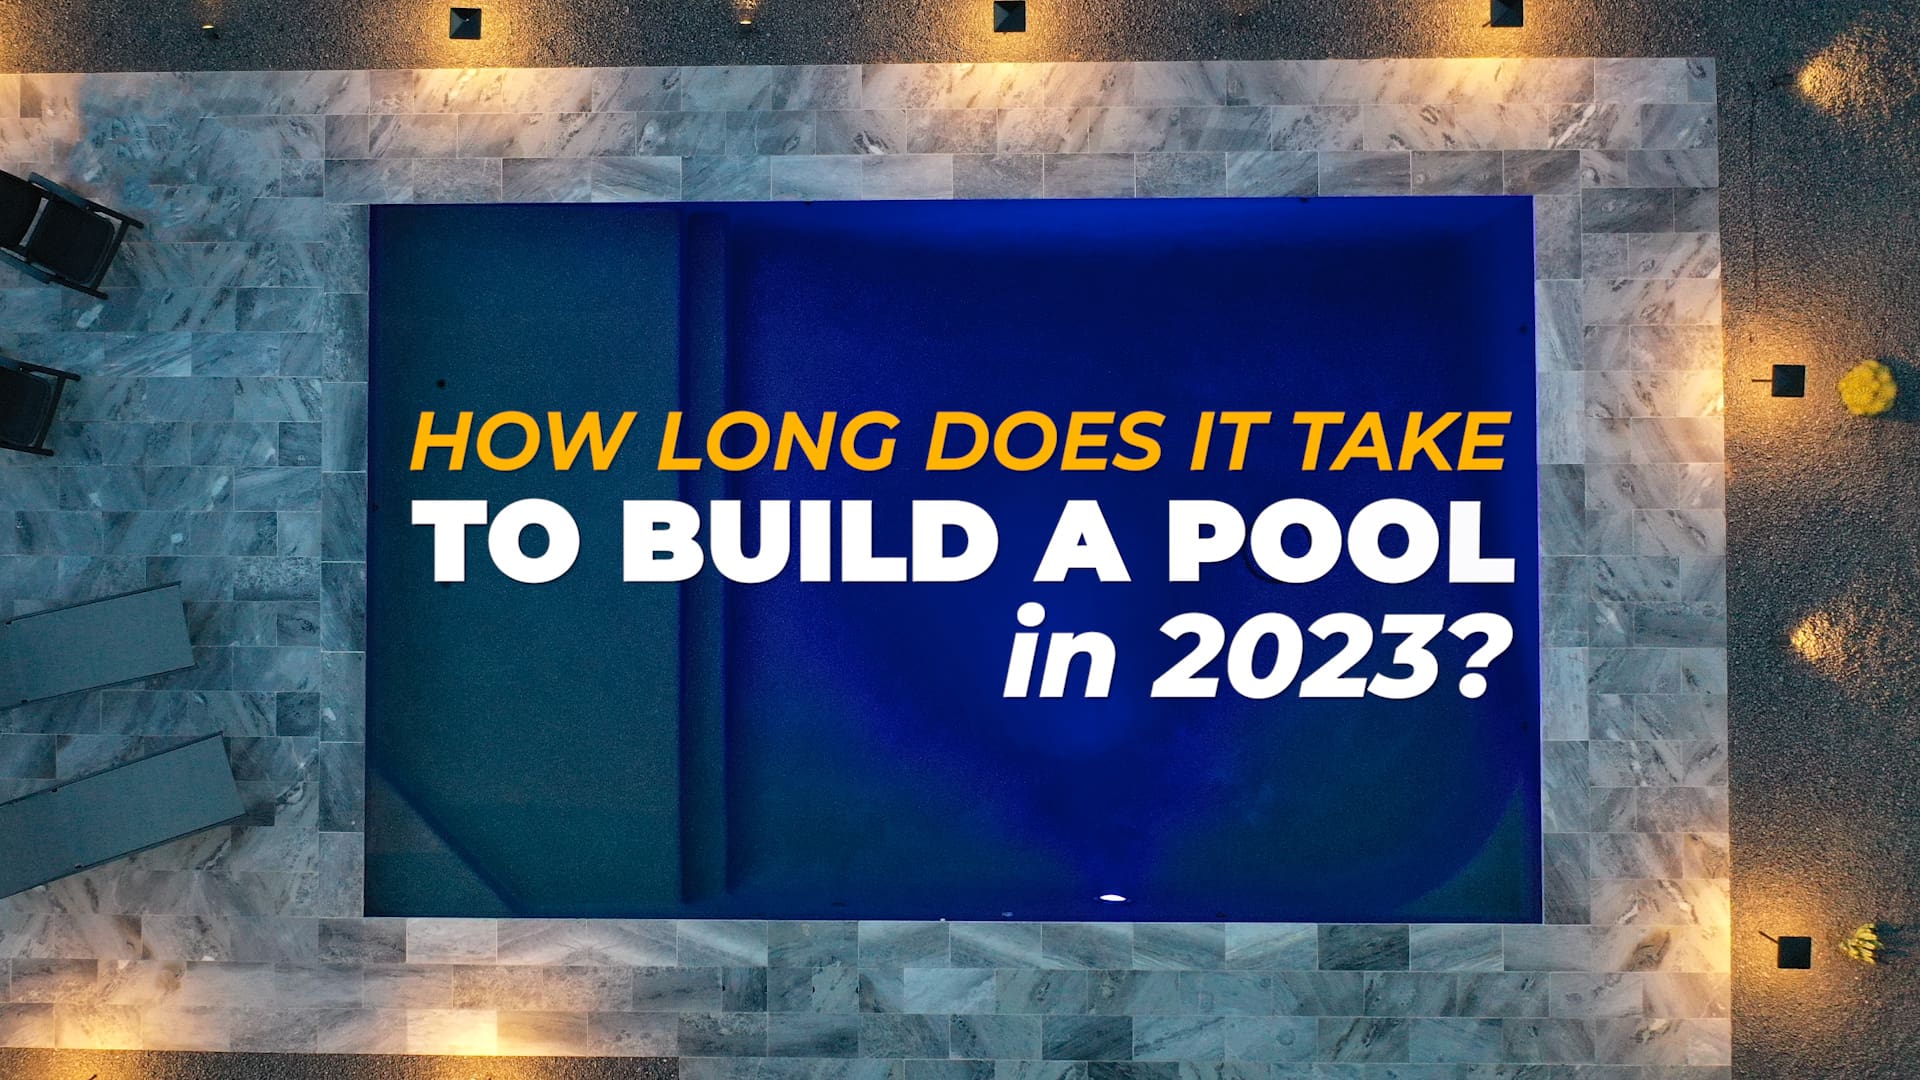 How Long Does It Take To Build A Pool In 2023? An Arizona Case Study.